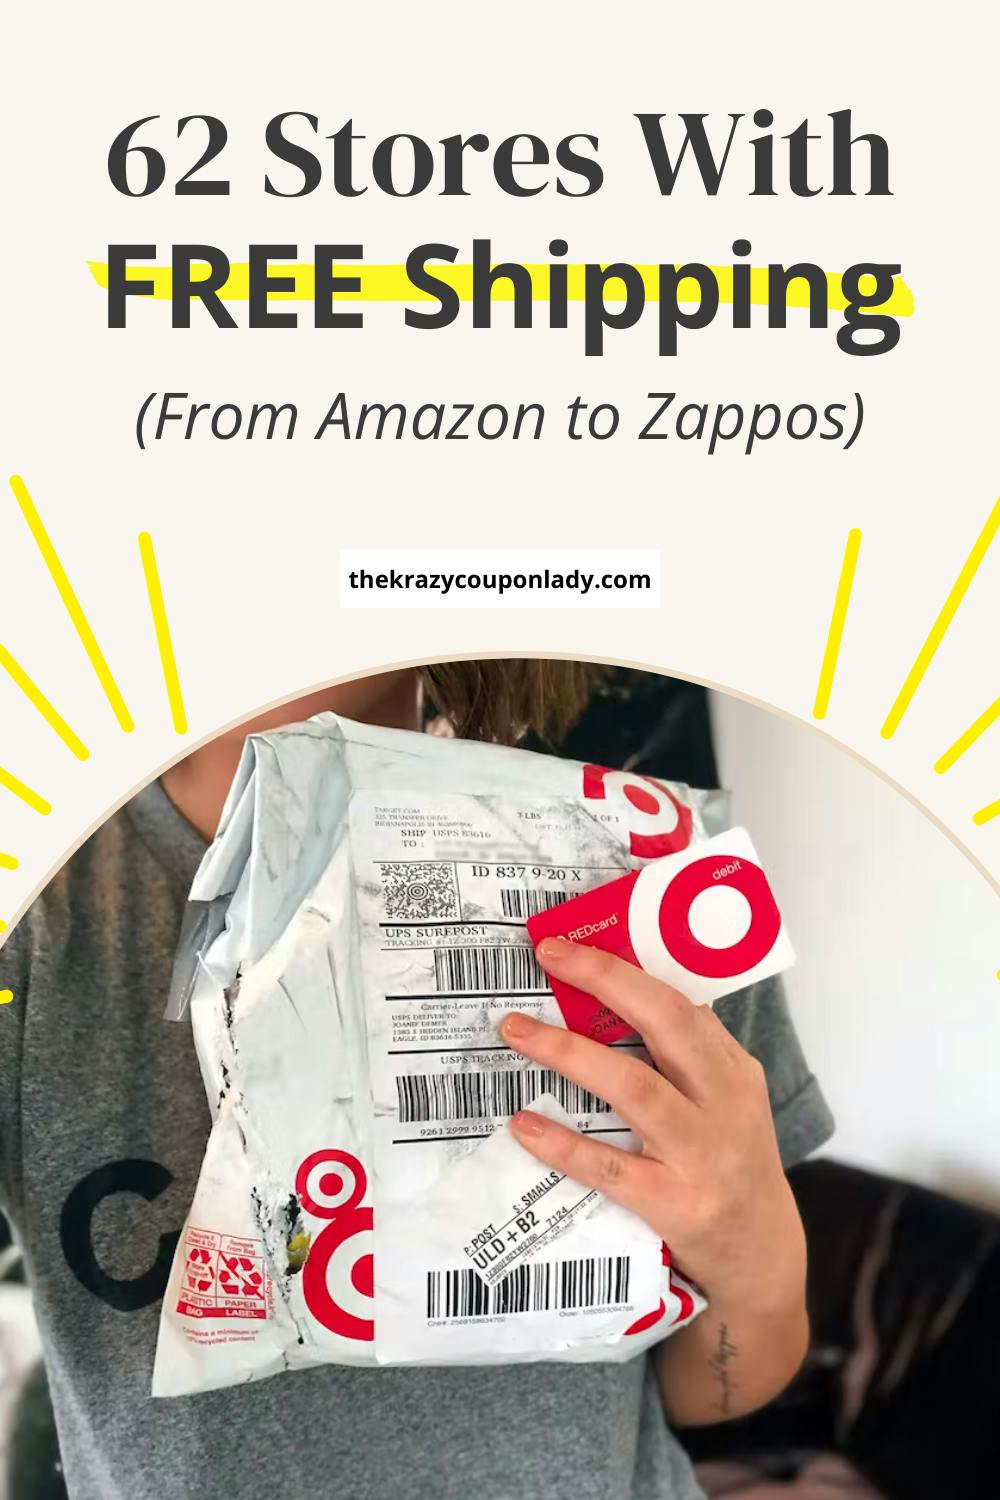 62 Stores With Free Shipping (Really!): From Amazon to Zappos